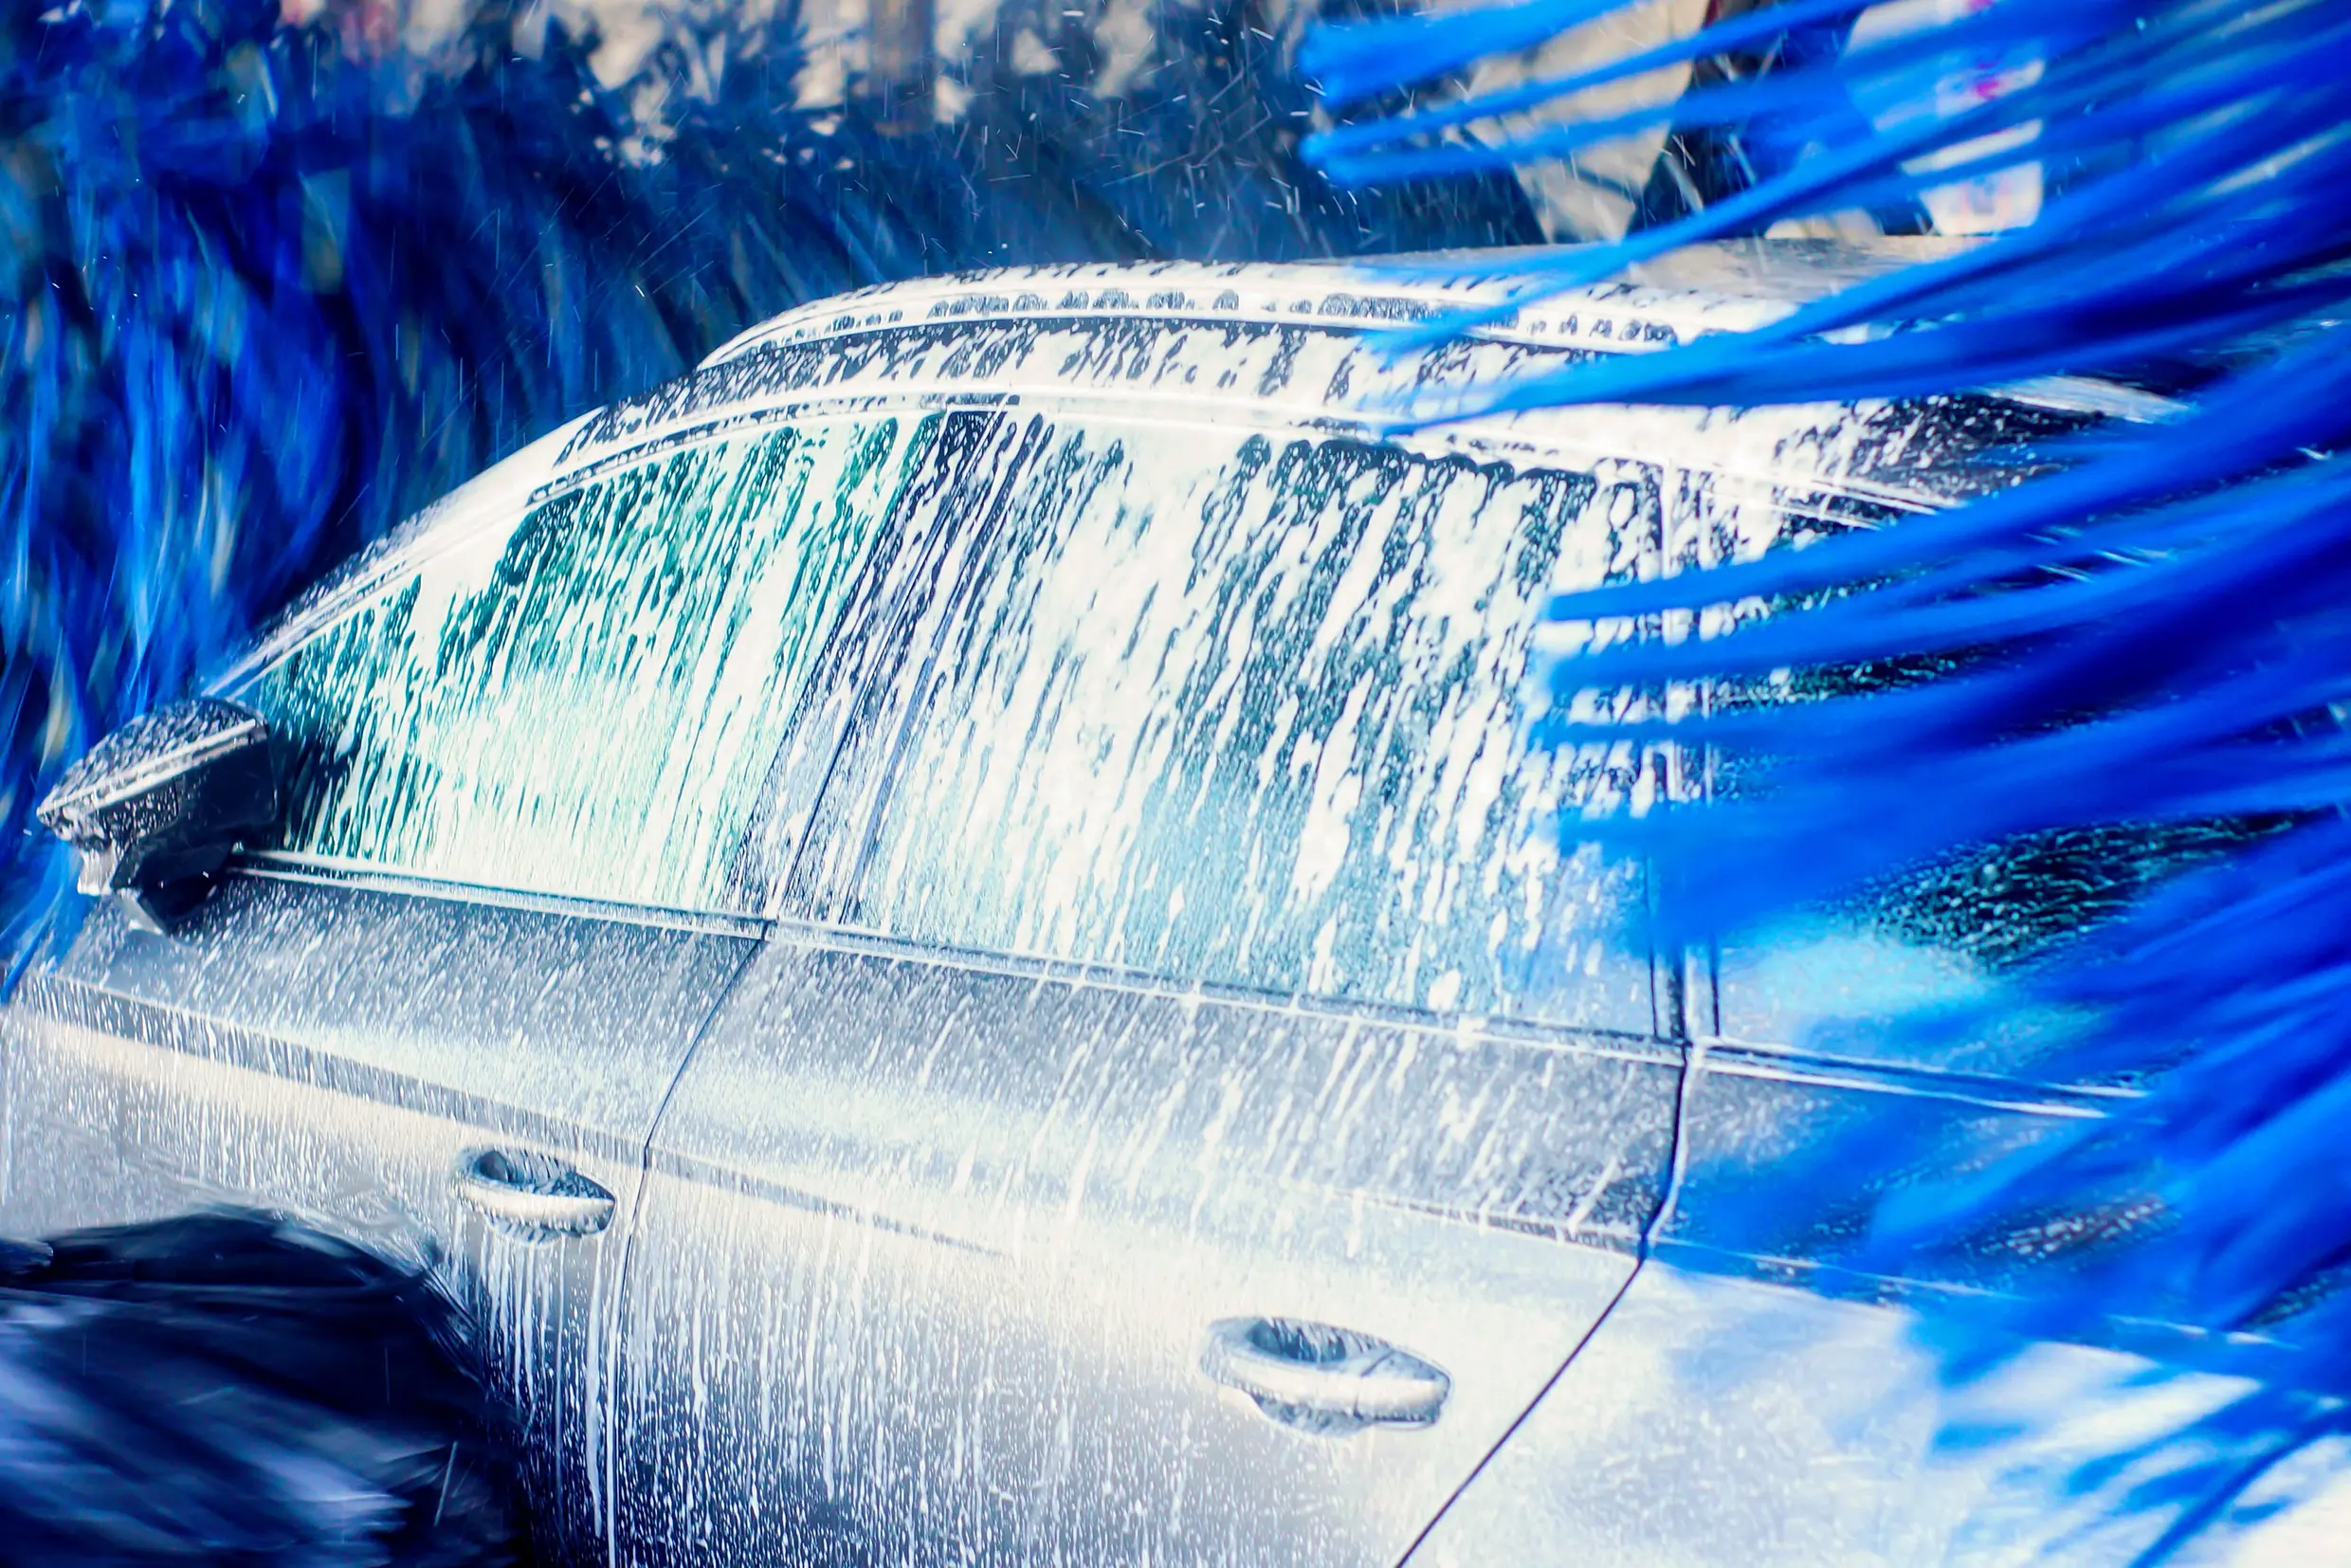 Car being washed by an automatic car wash